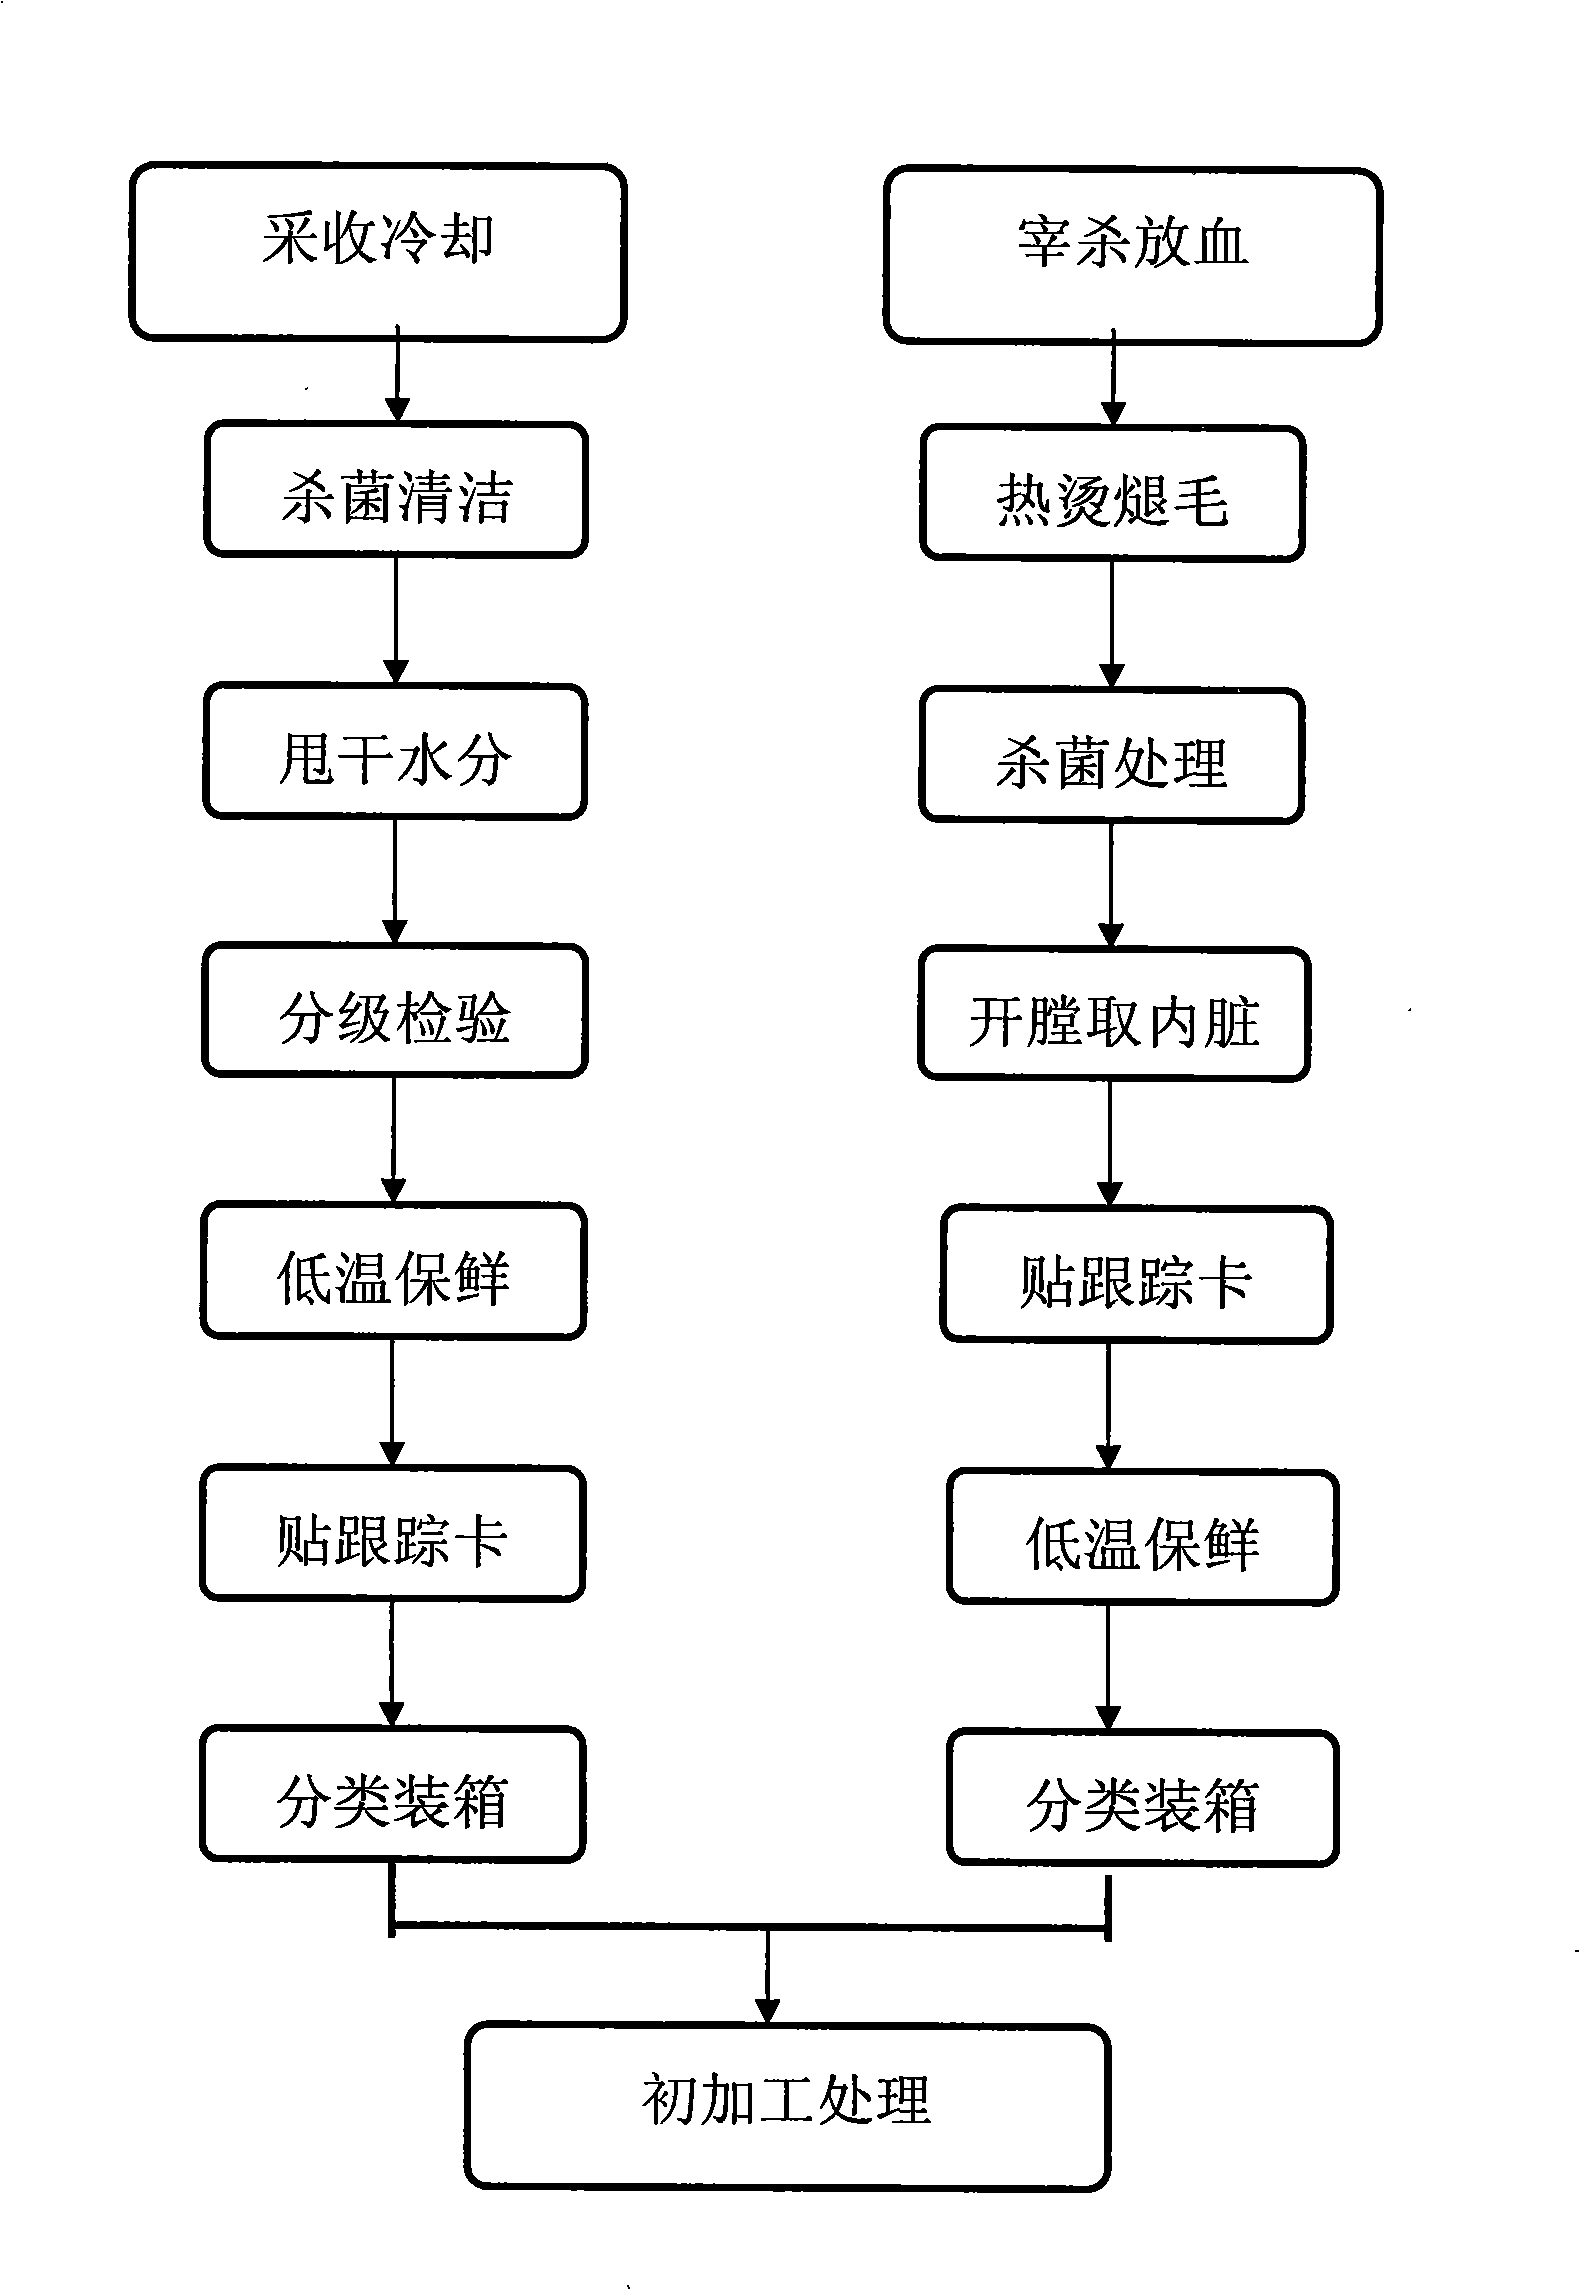 Method for preparing beverage and food suitable for microwave buffet dinner